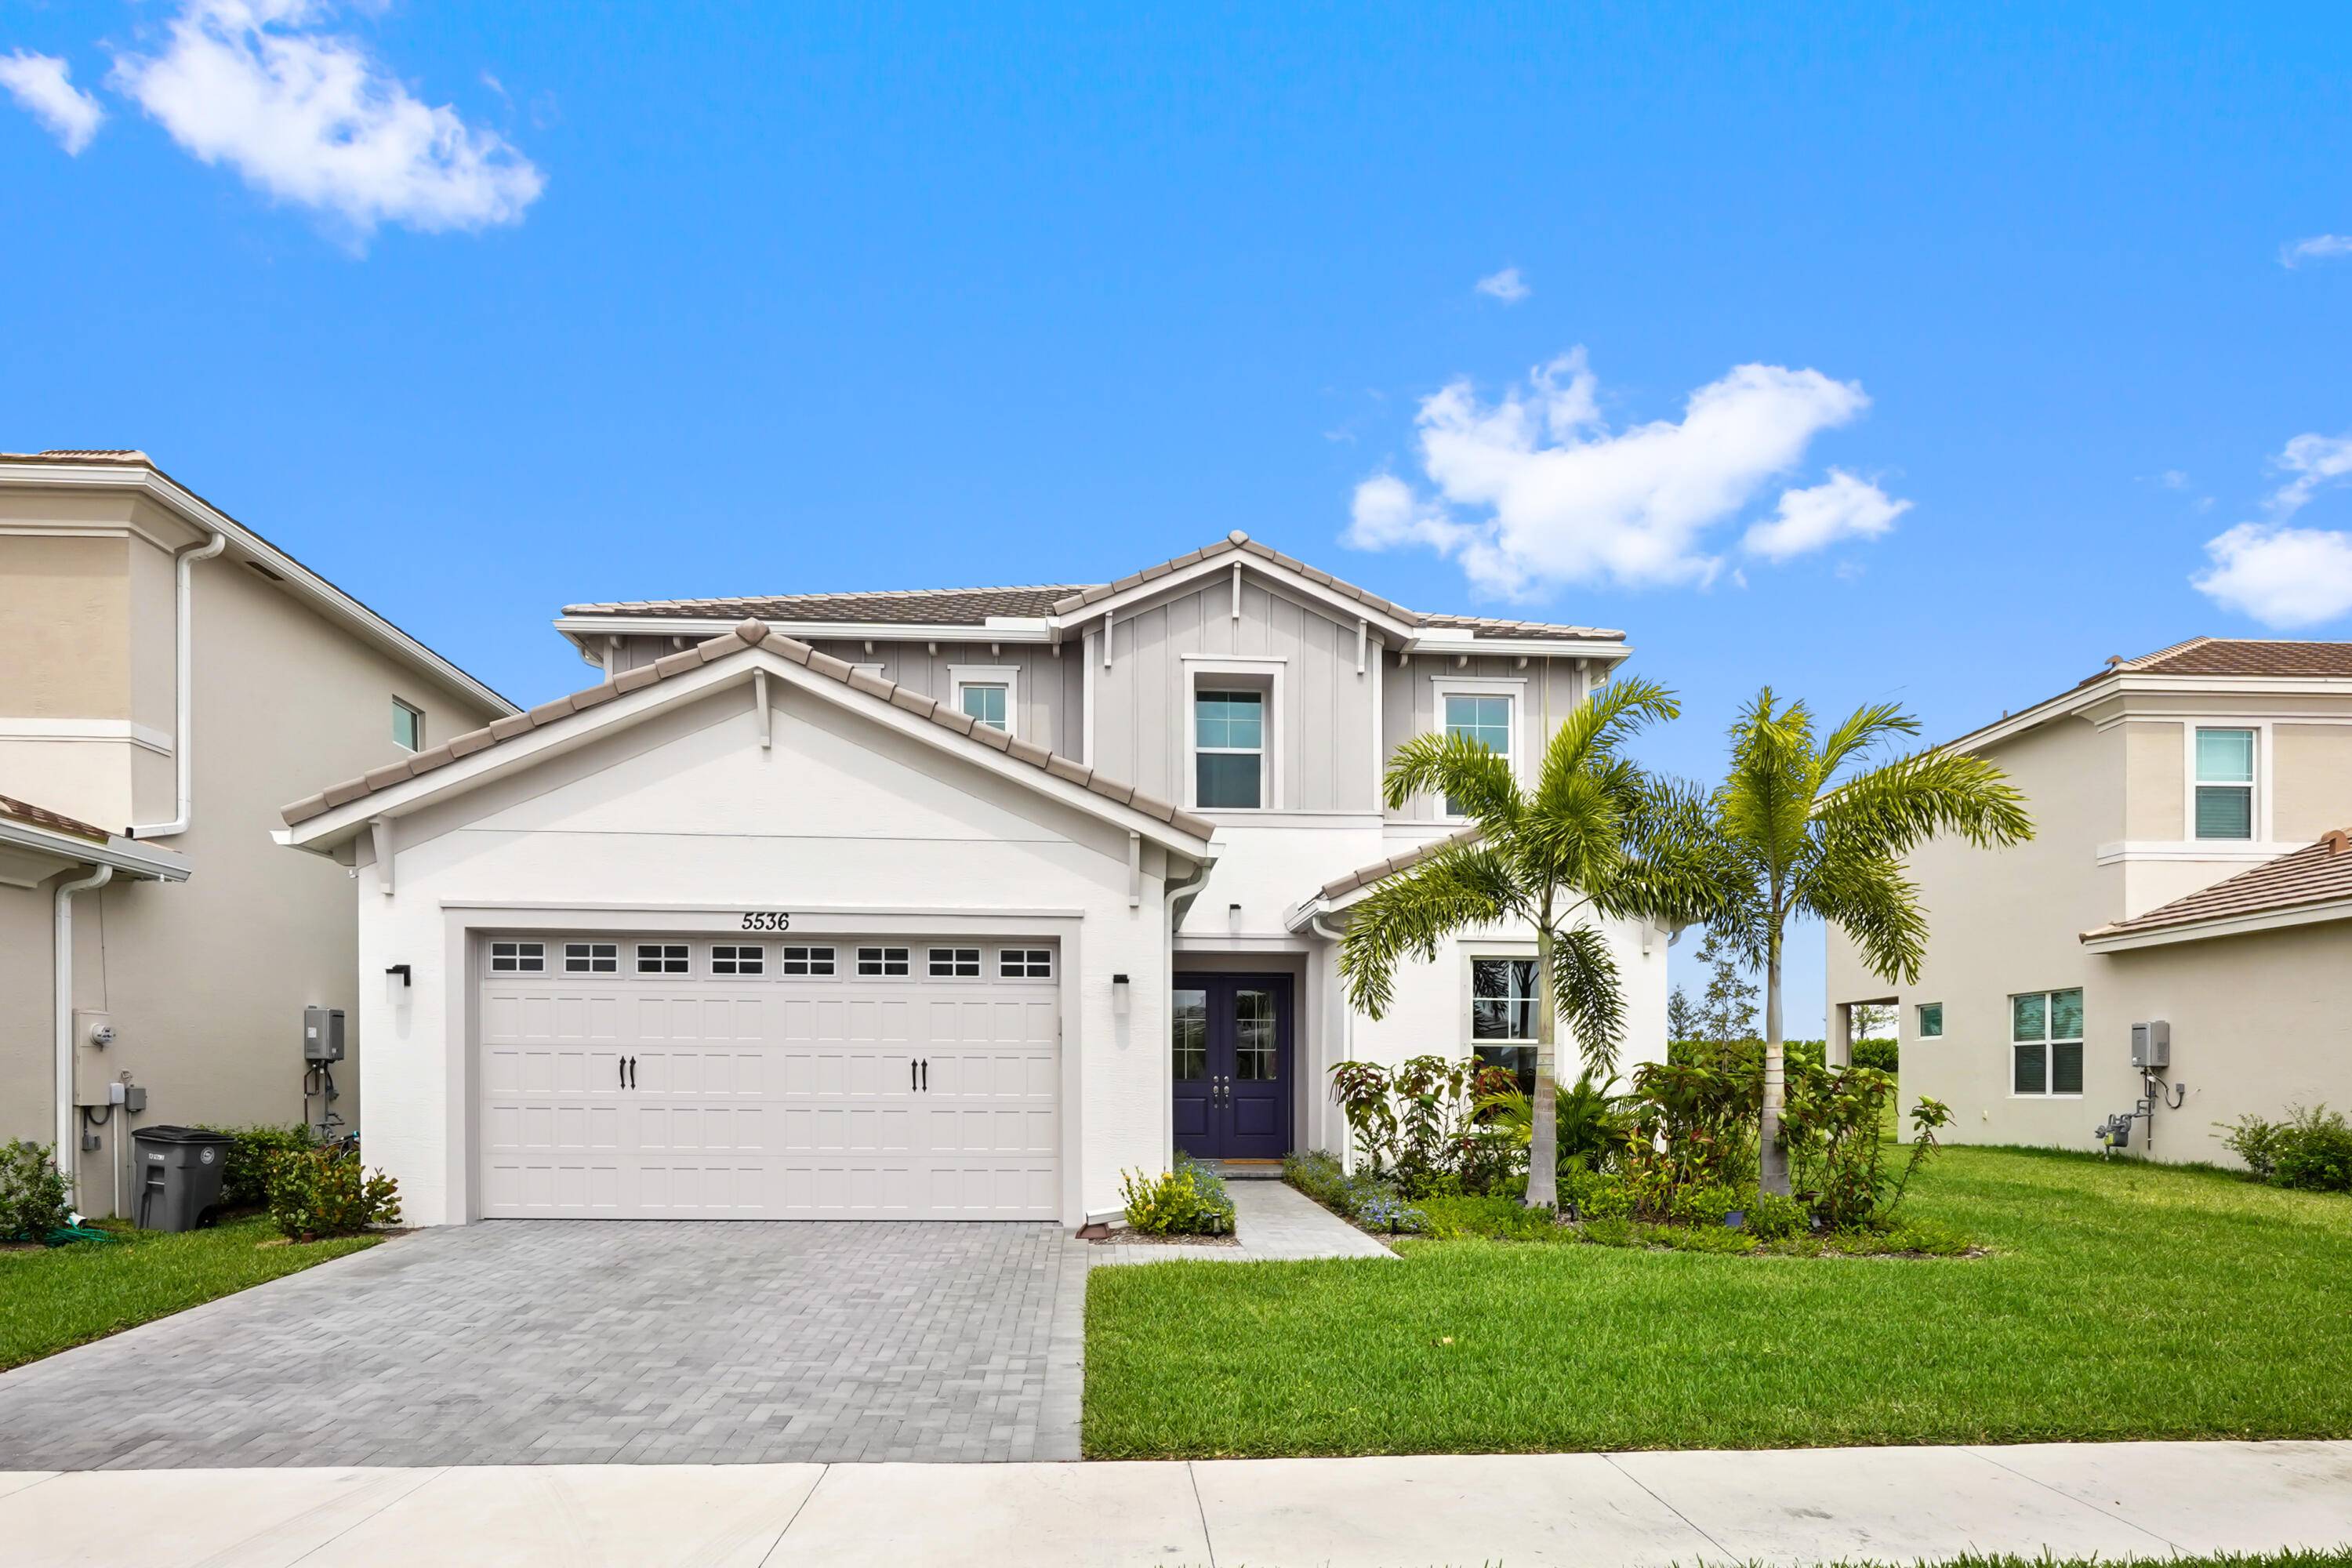 Nestled within the prestigious gated community of Orchards of Westlake, this newly constructed single family home sets the standard for luxurious living.